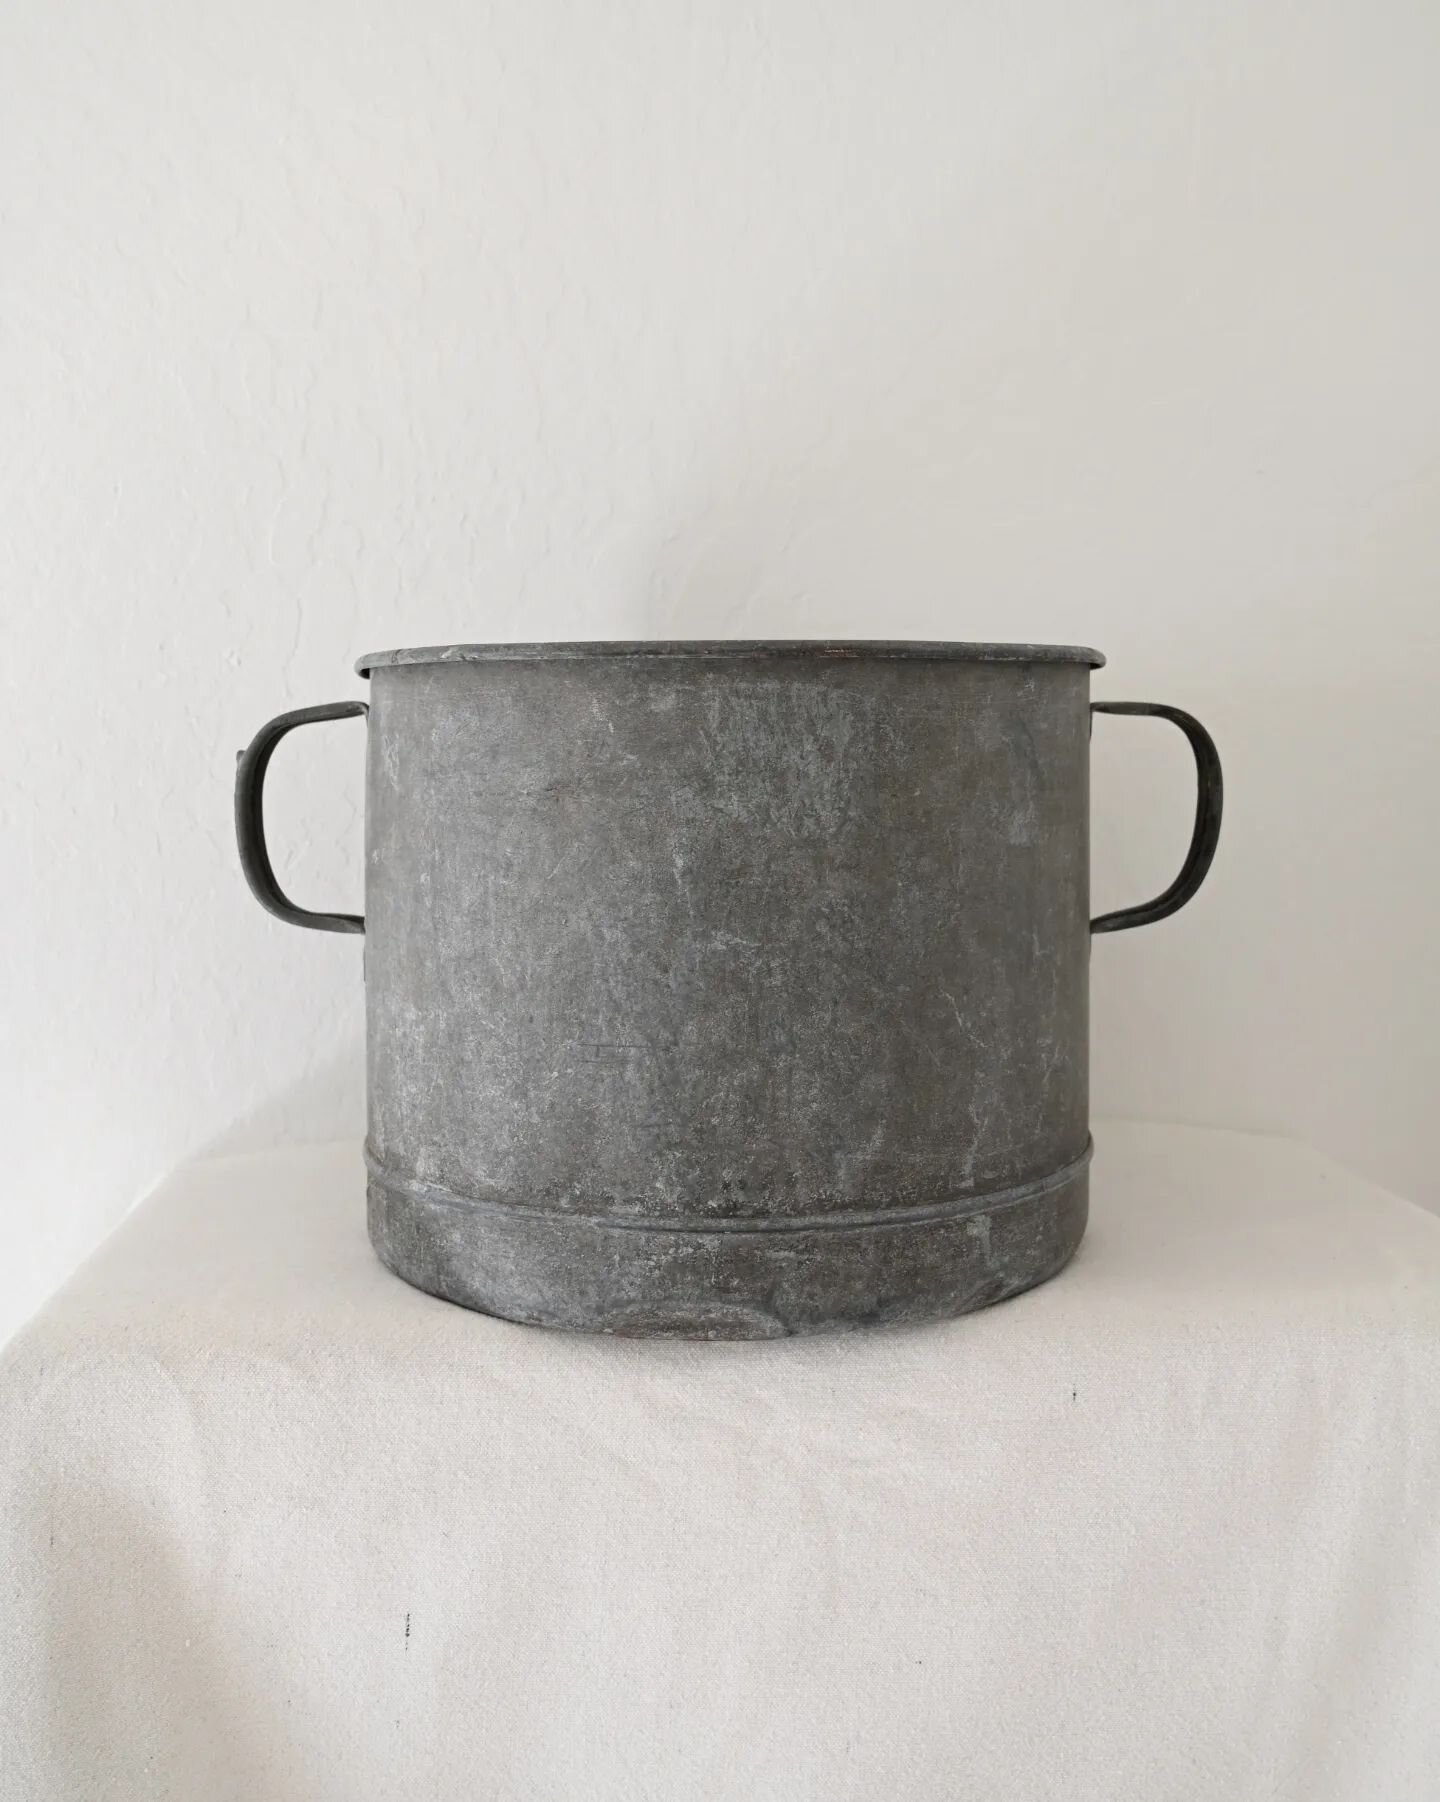 Another zinc pot has come into our collection! The previous, French, this one, Hungarian. With wonderful even wear giving it the most beautiful character. This pot speaks for itself with its enduring design and shape. The uses of this pot are endless